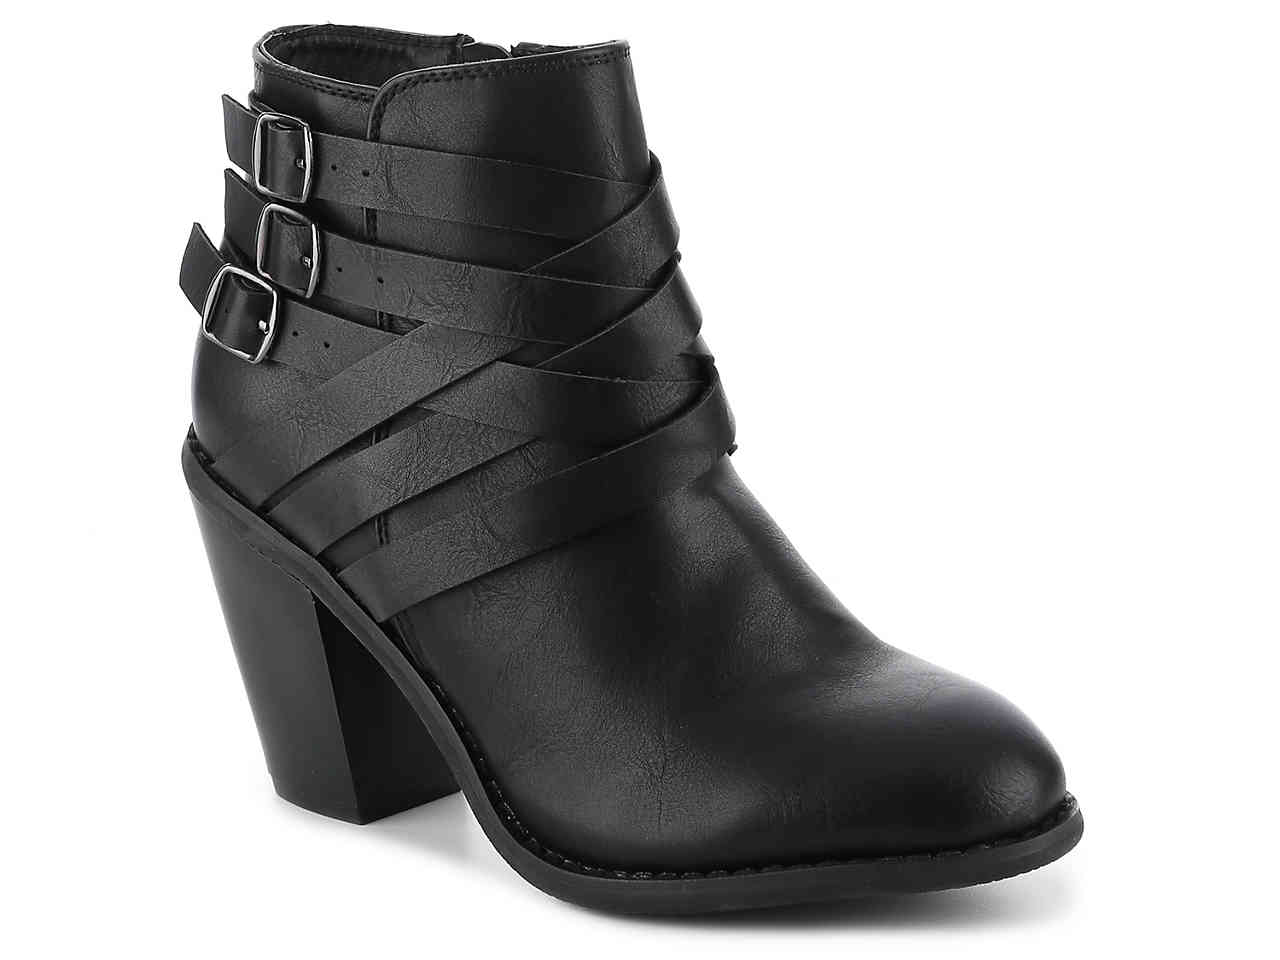 Edgy Style 101: 6 Best Shoe Styles for Edgy Girls - College Fashion